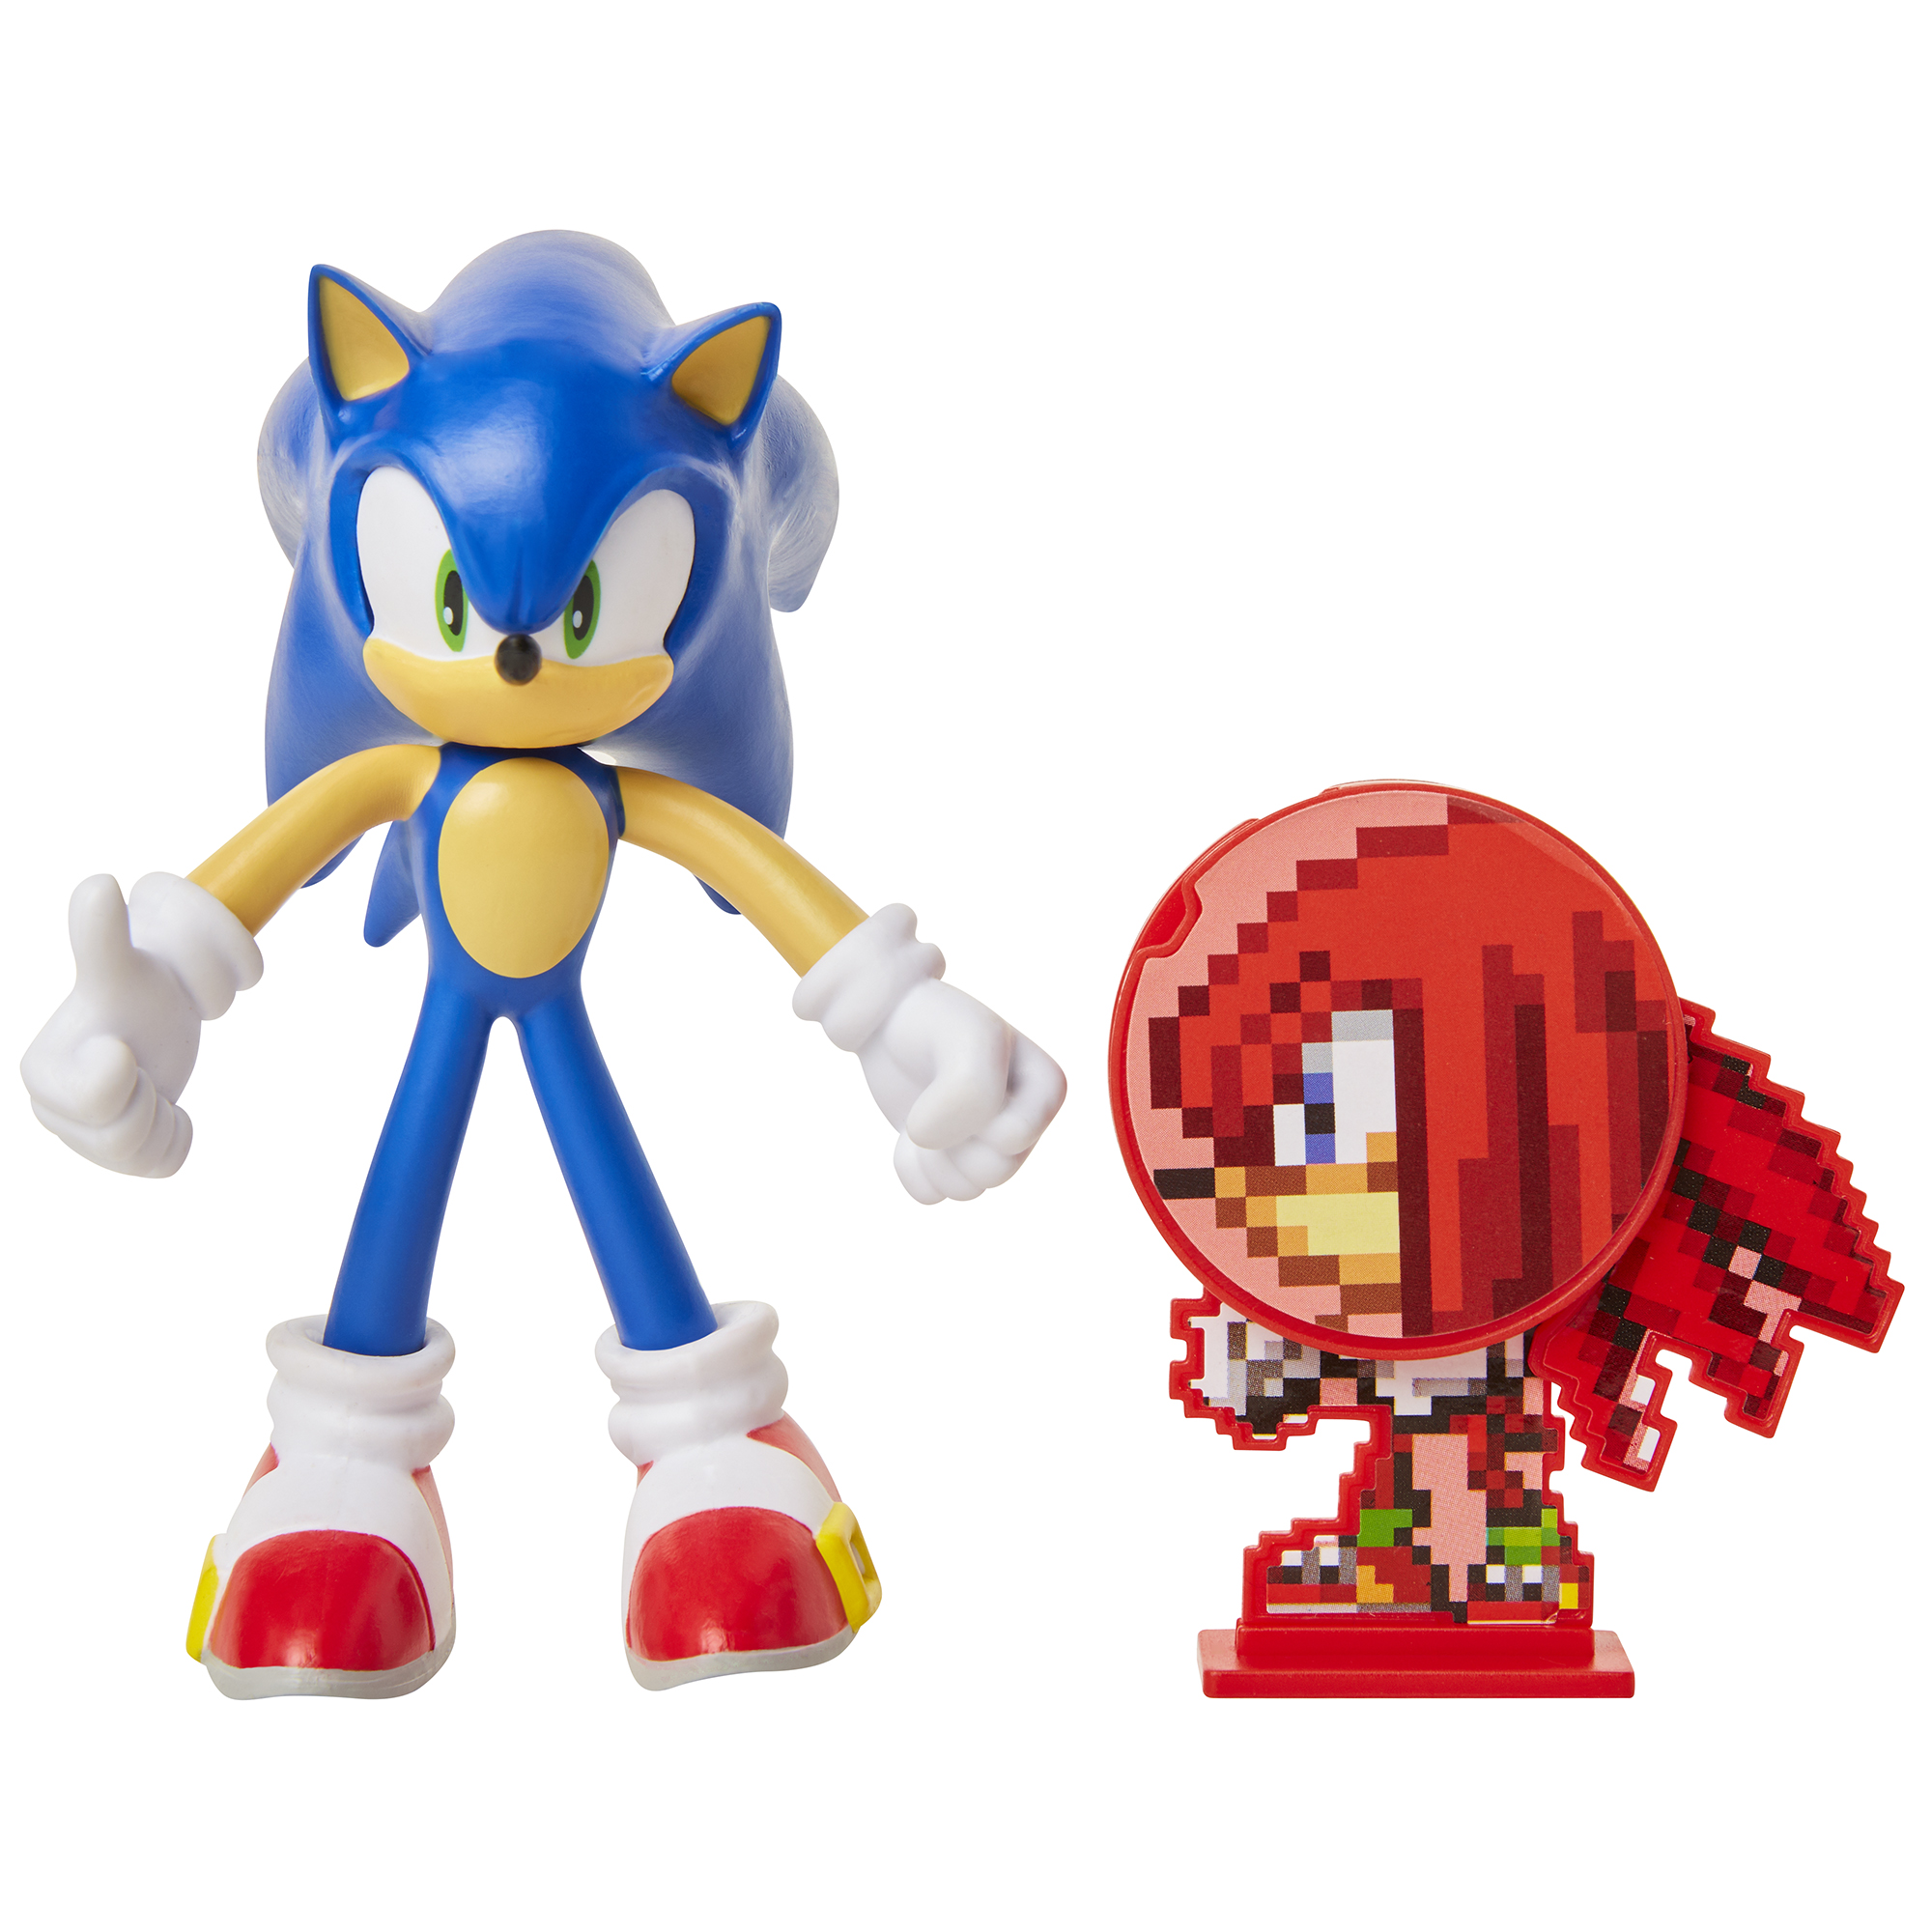 4" Basic Figures w/ Accessory Wave 1 (Sonic)